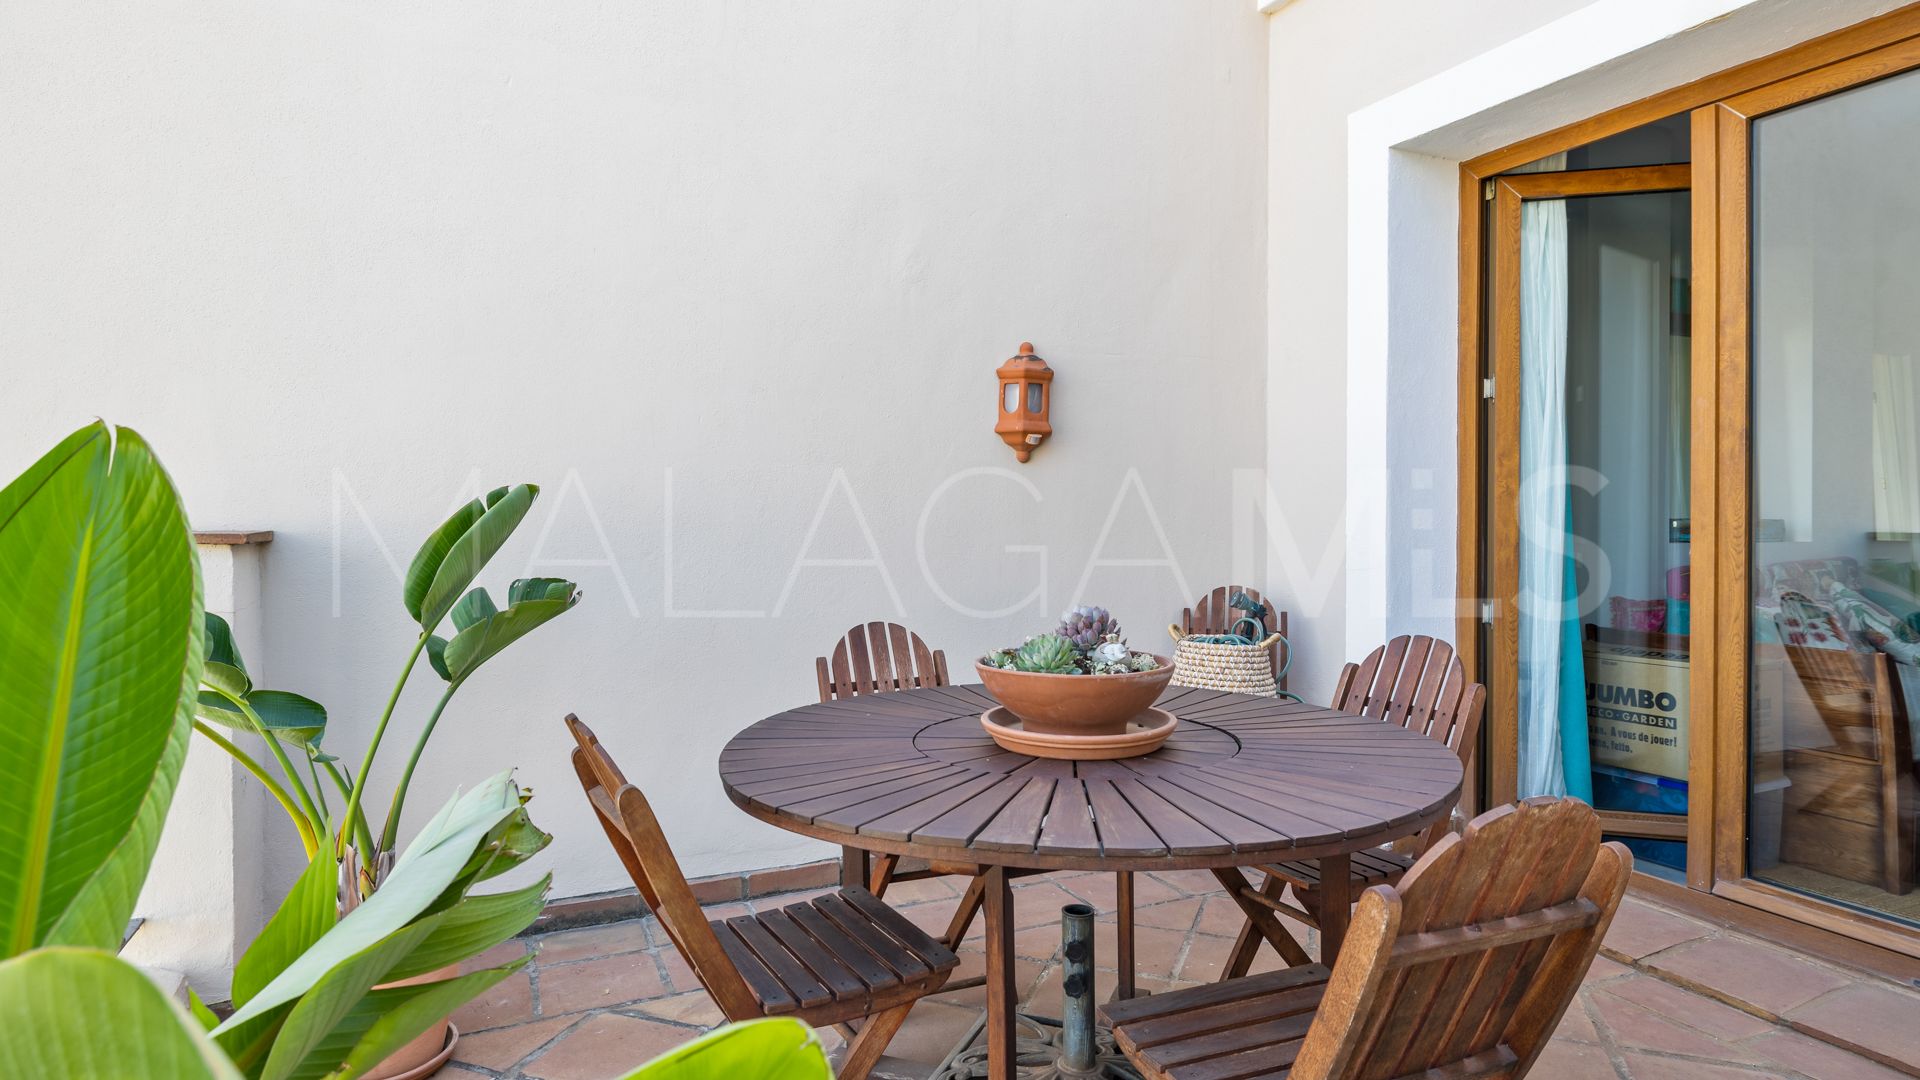 Adosado for sale with 4 bedrooms in Paraiso Hills